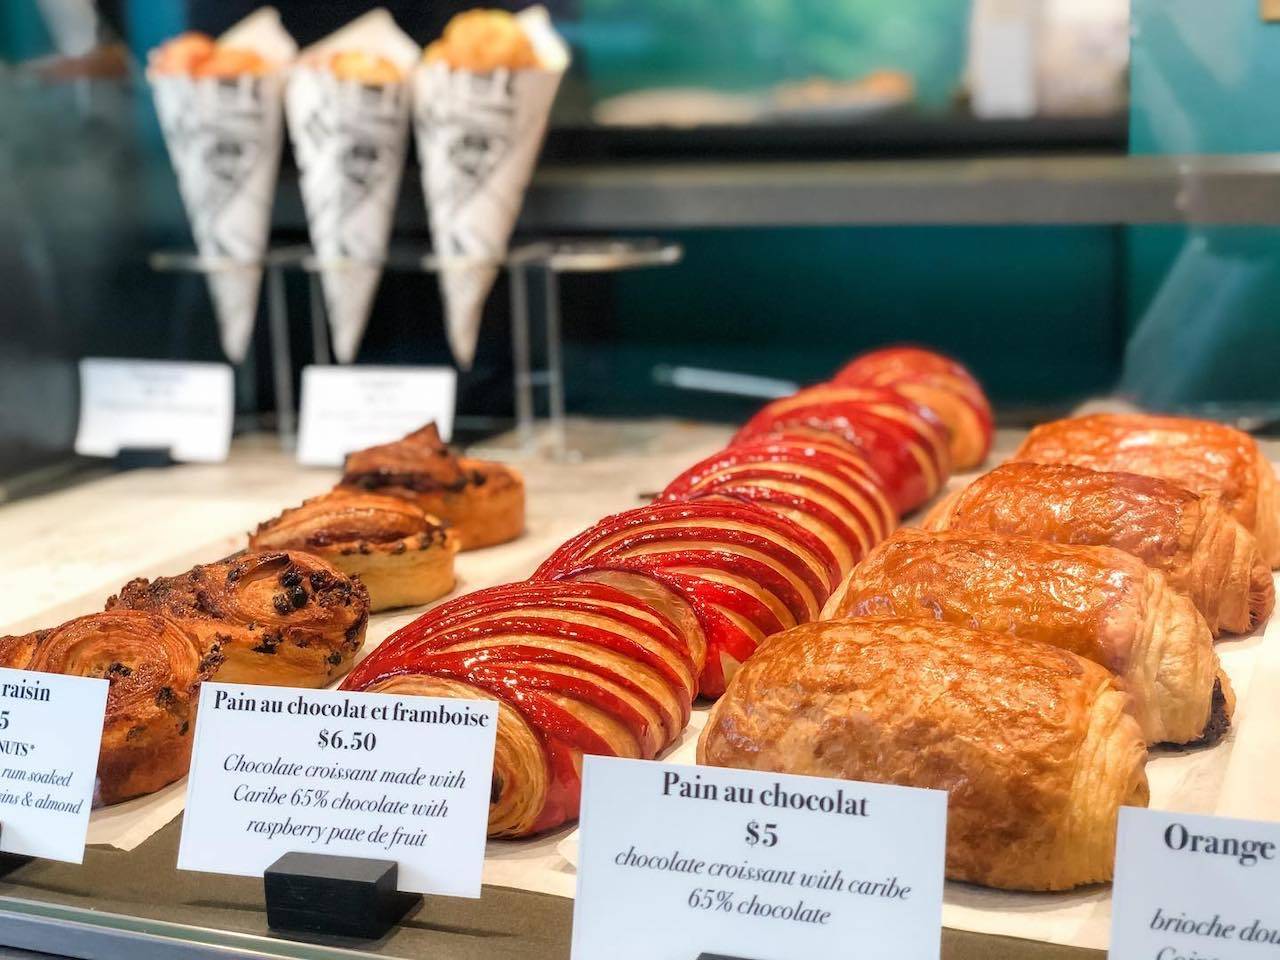 A sample of some of the bakery’s offerings. Photo courtesy La Fête Pâtisserie Française